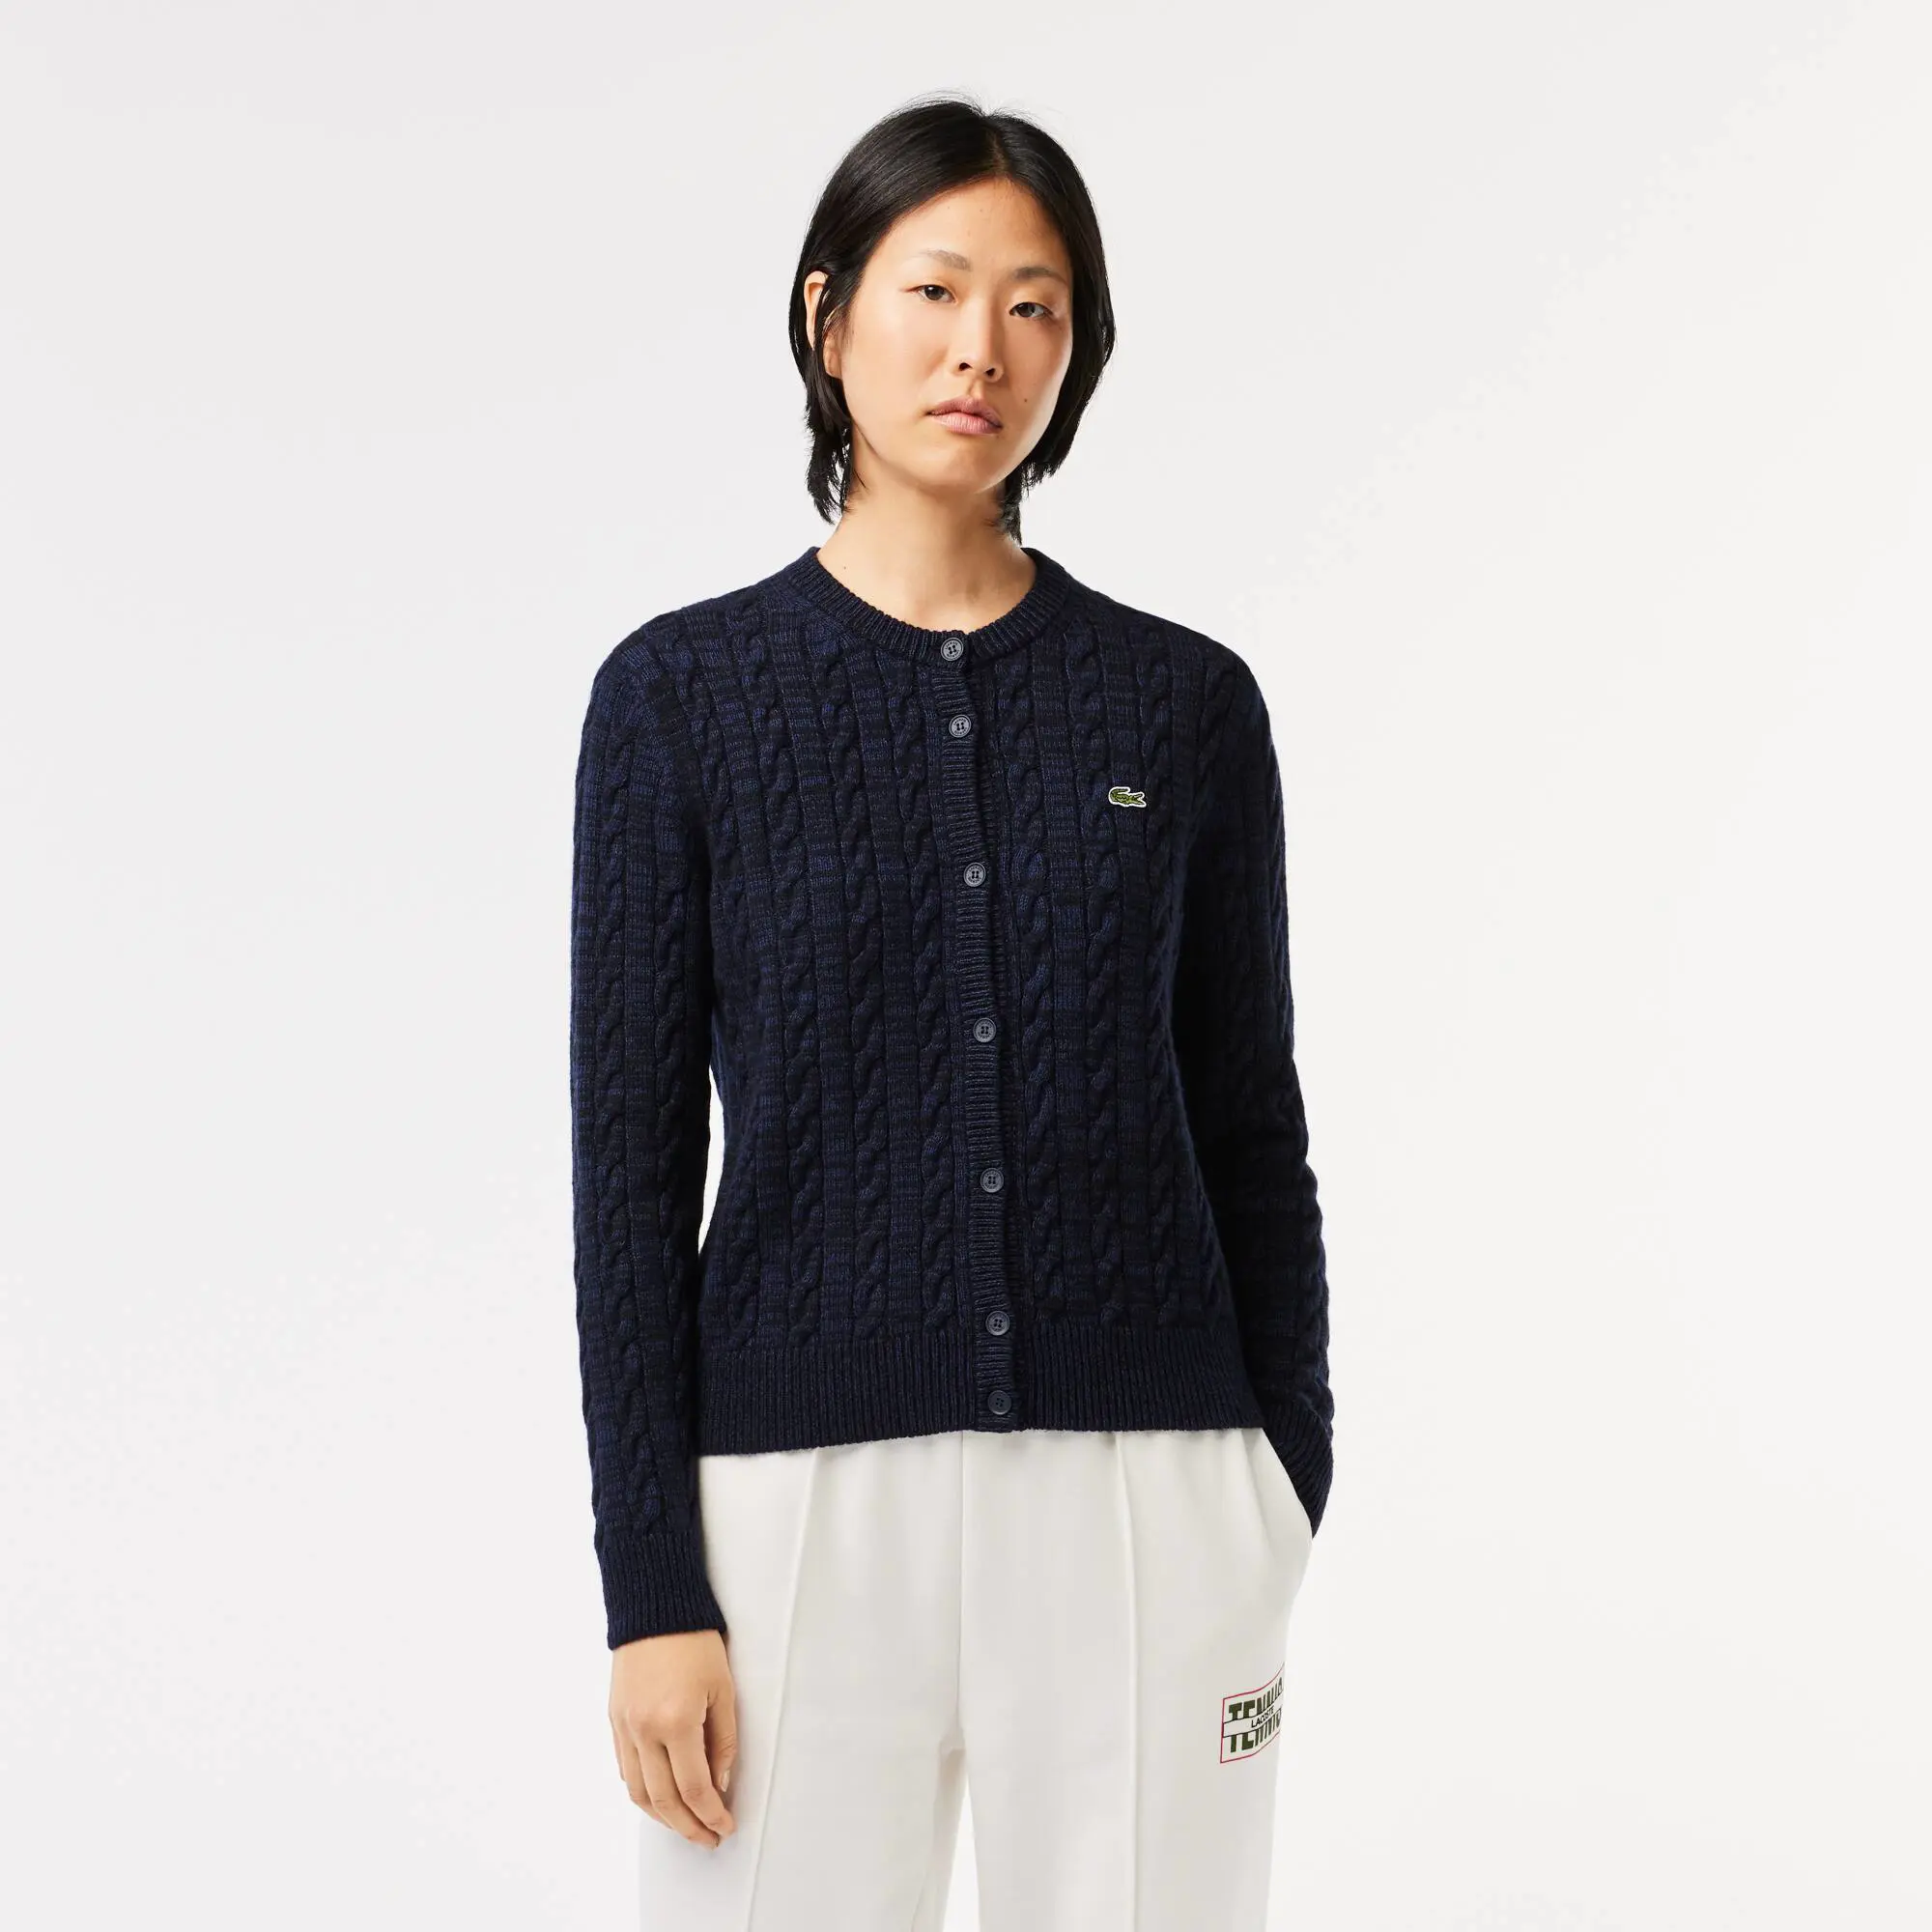 Lacoste Women's Wool Blend Cable Knit Cardigan. 1